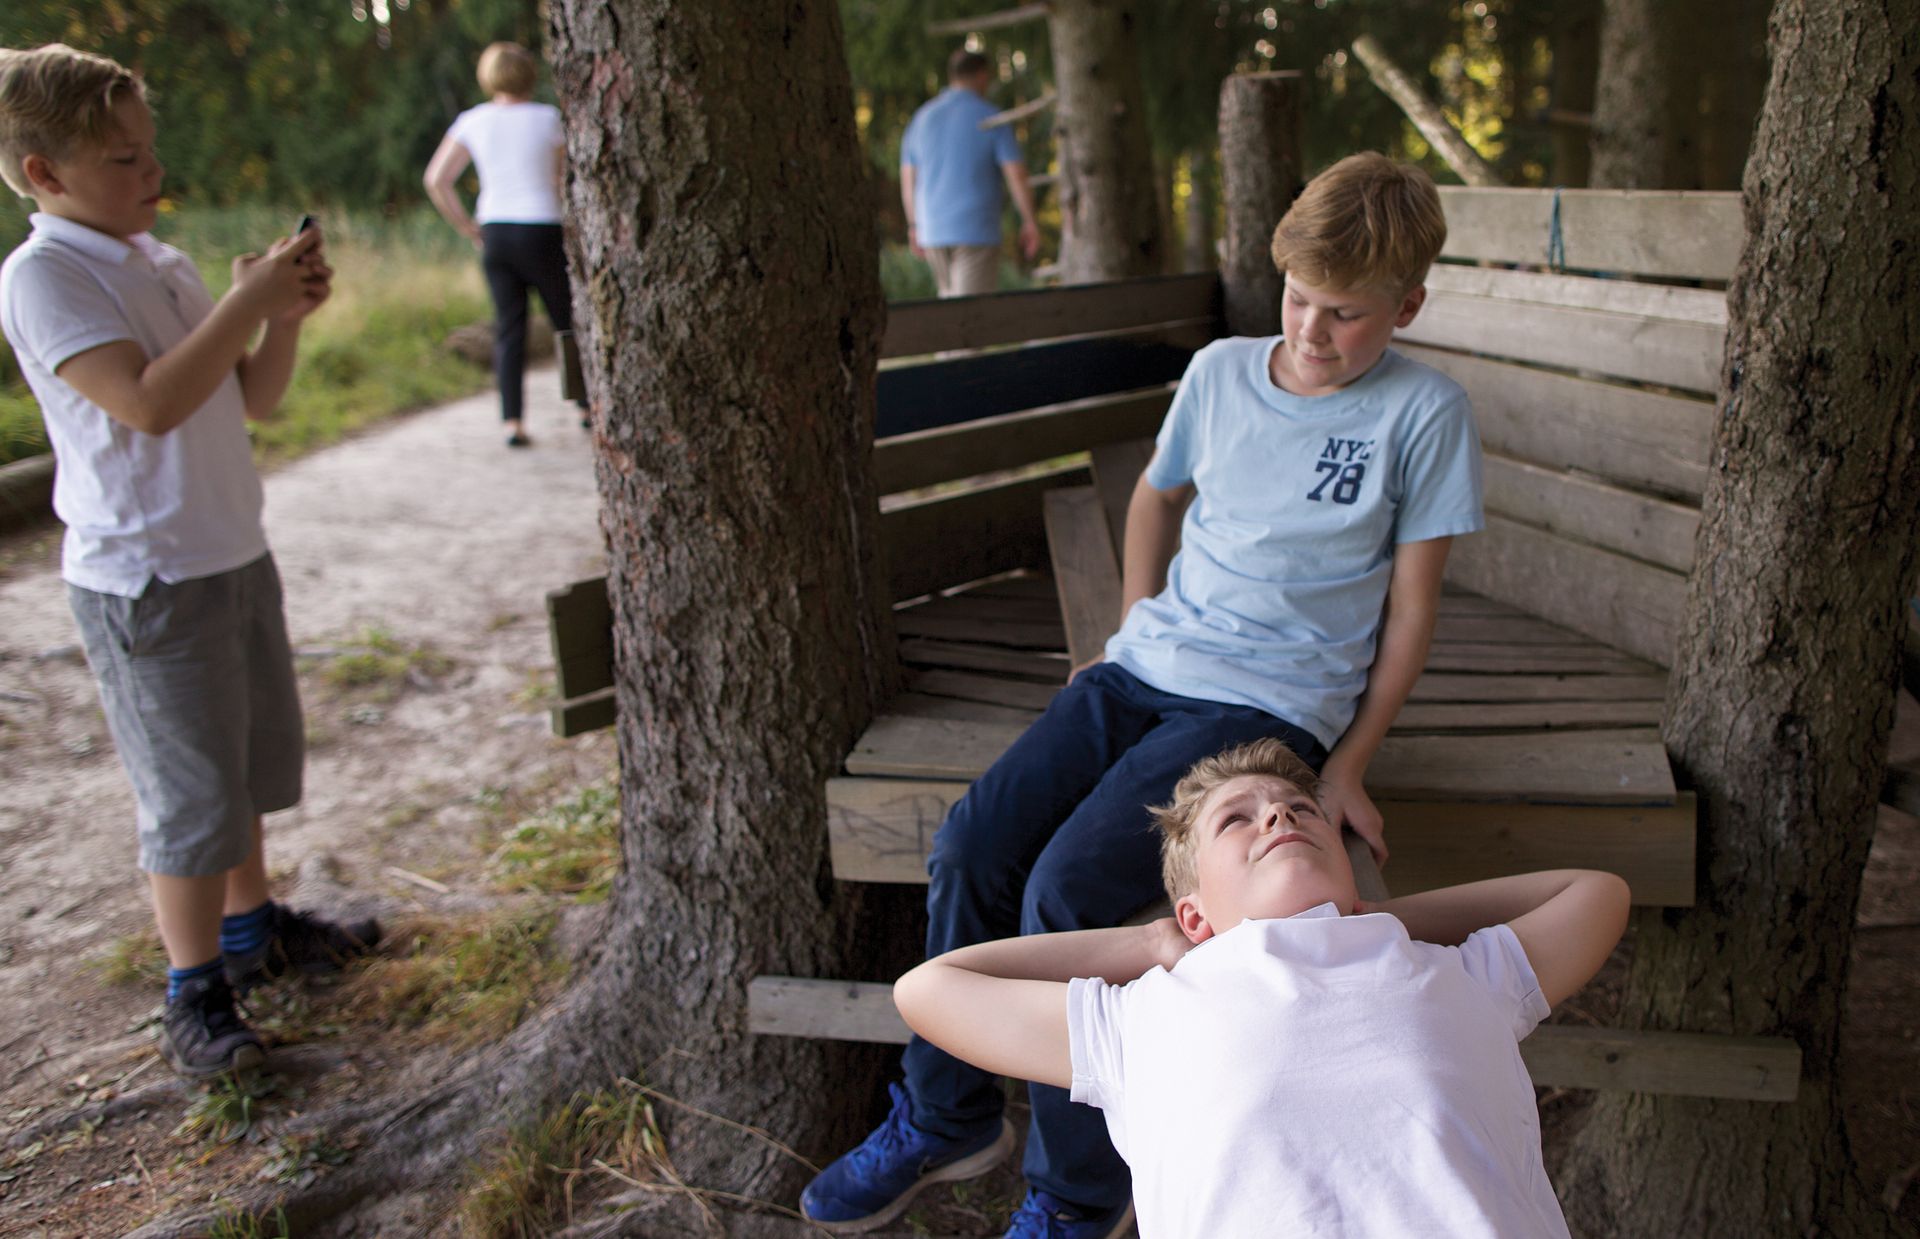 The Karlssons stop at a playground. Mats (right) peers up into the fir trees while talking to his brothers, Magnus (left) and Mikkel (center right).